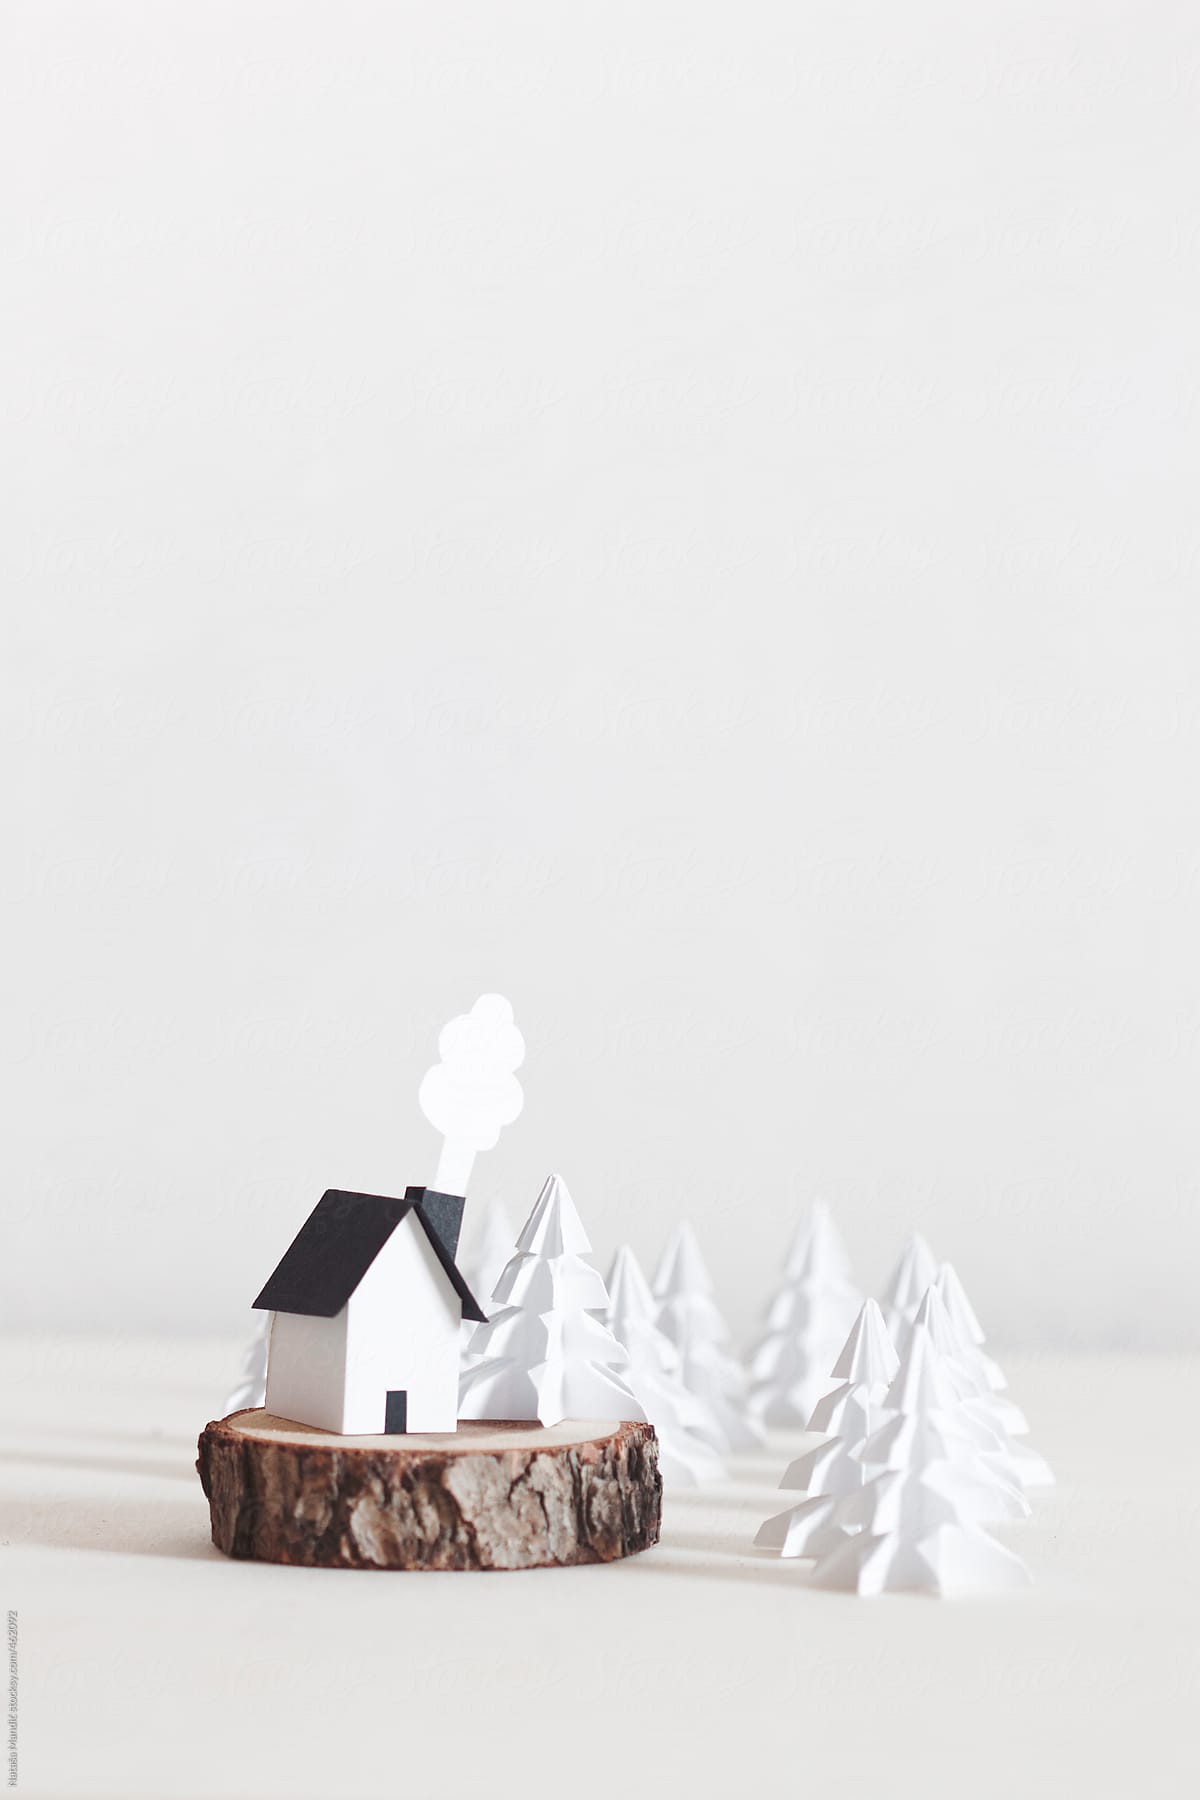 Origami christmas trees and a little house